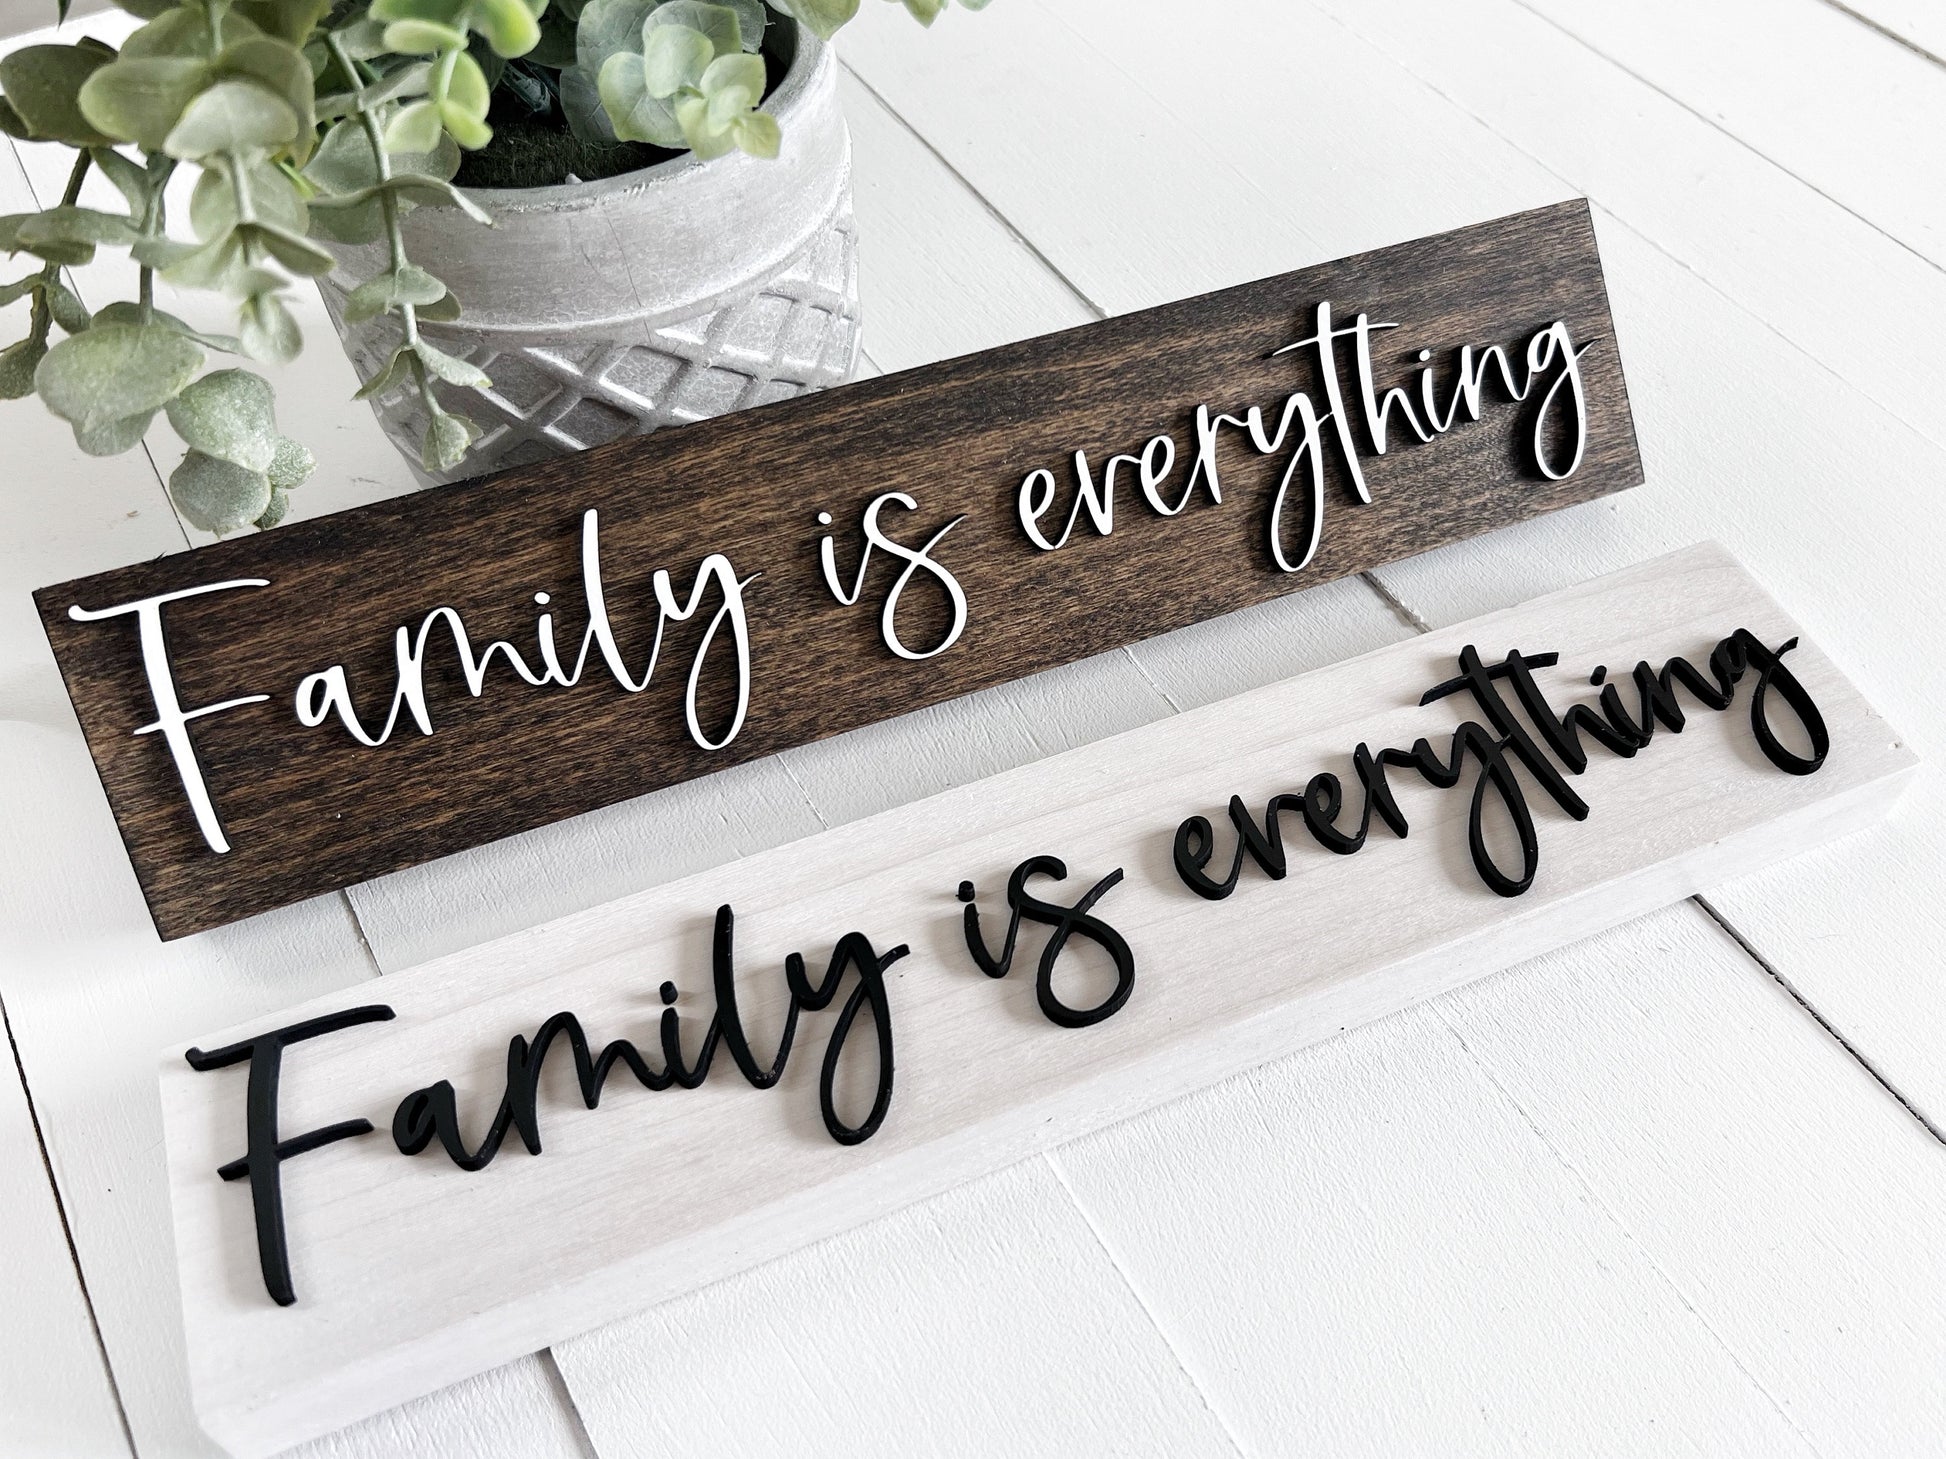 Family is Everything Wood Sign with Raised Lettering, Gift for Family